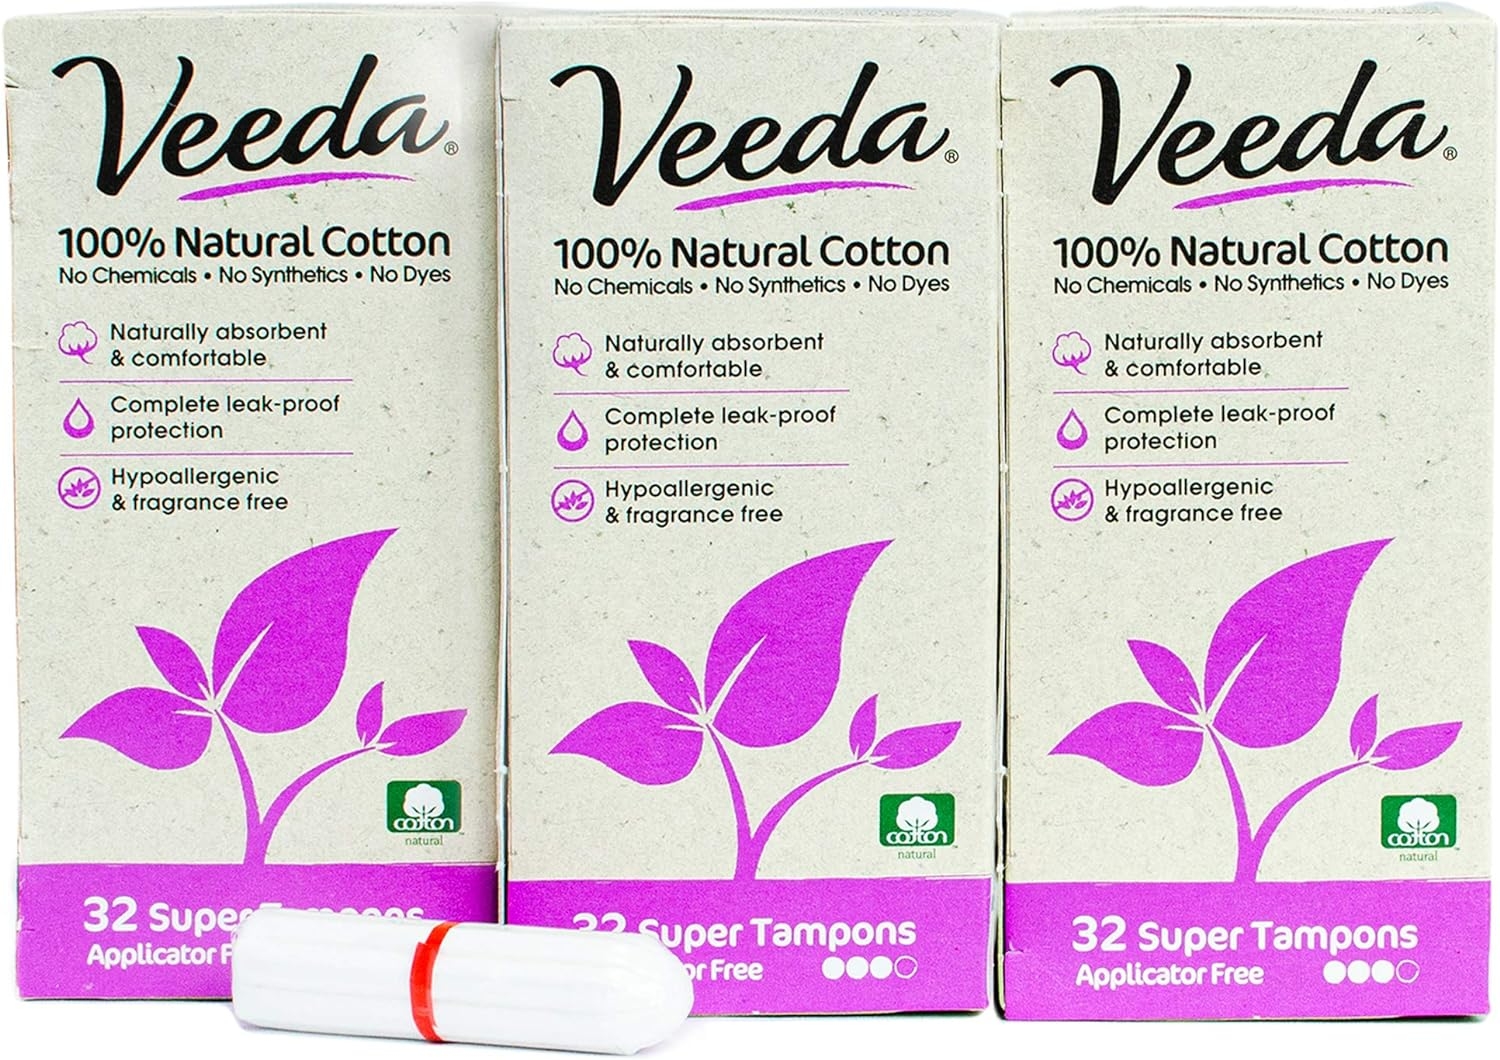 Veeda 100% Natural Cotton Applicator Free Super Tampons, Chlorine and Toxin Free, Unscented, 3 Packs of 32 Count Each